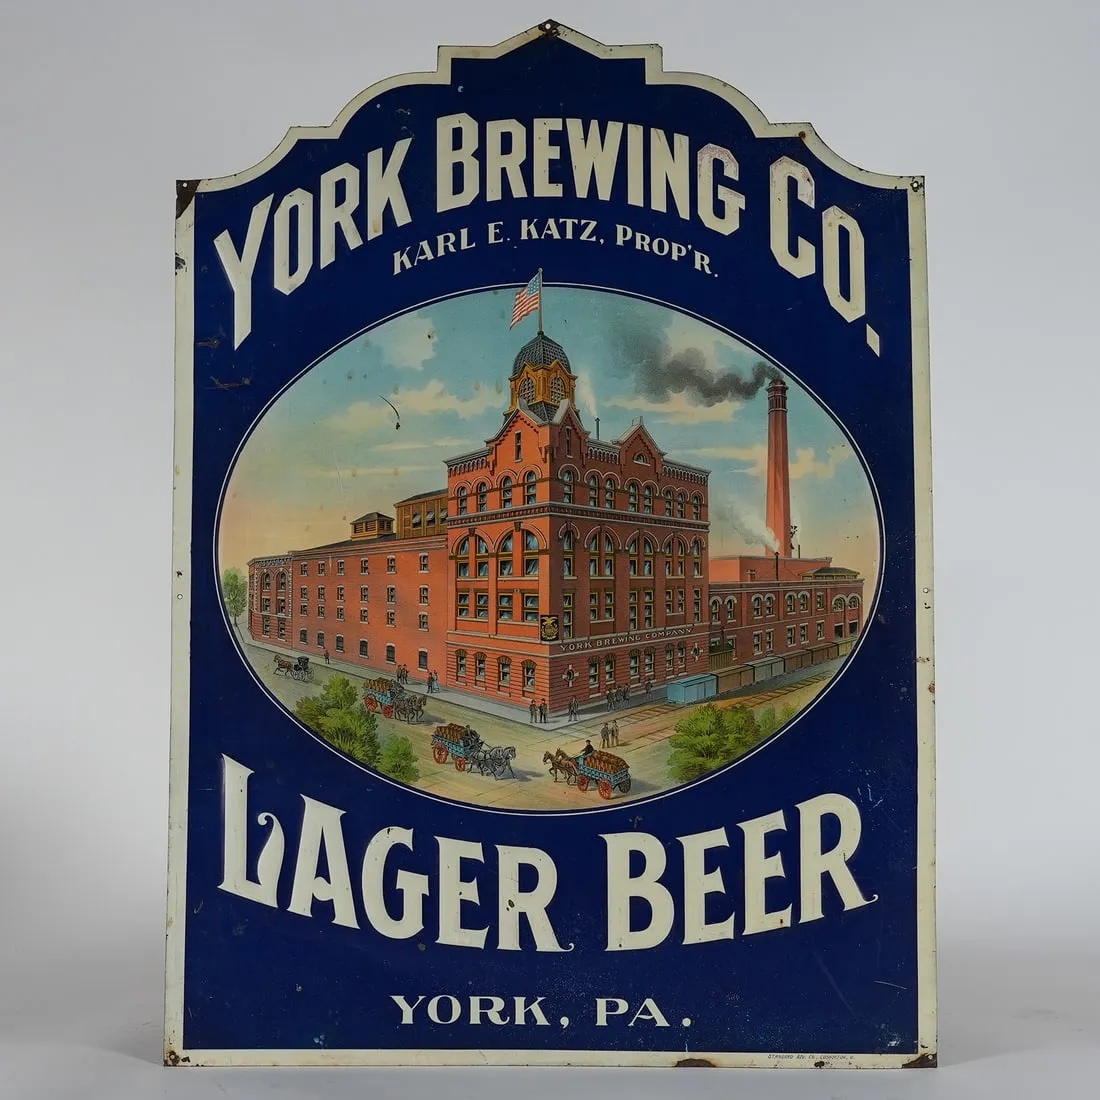 York Brewing Lager Beer sign, estimated at $250-$250,000 at Morean Auctions.
